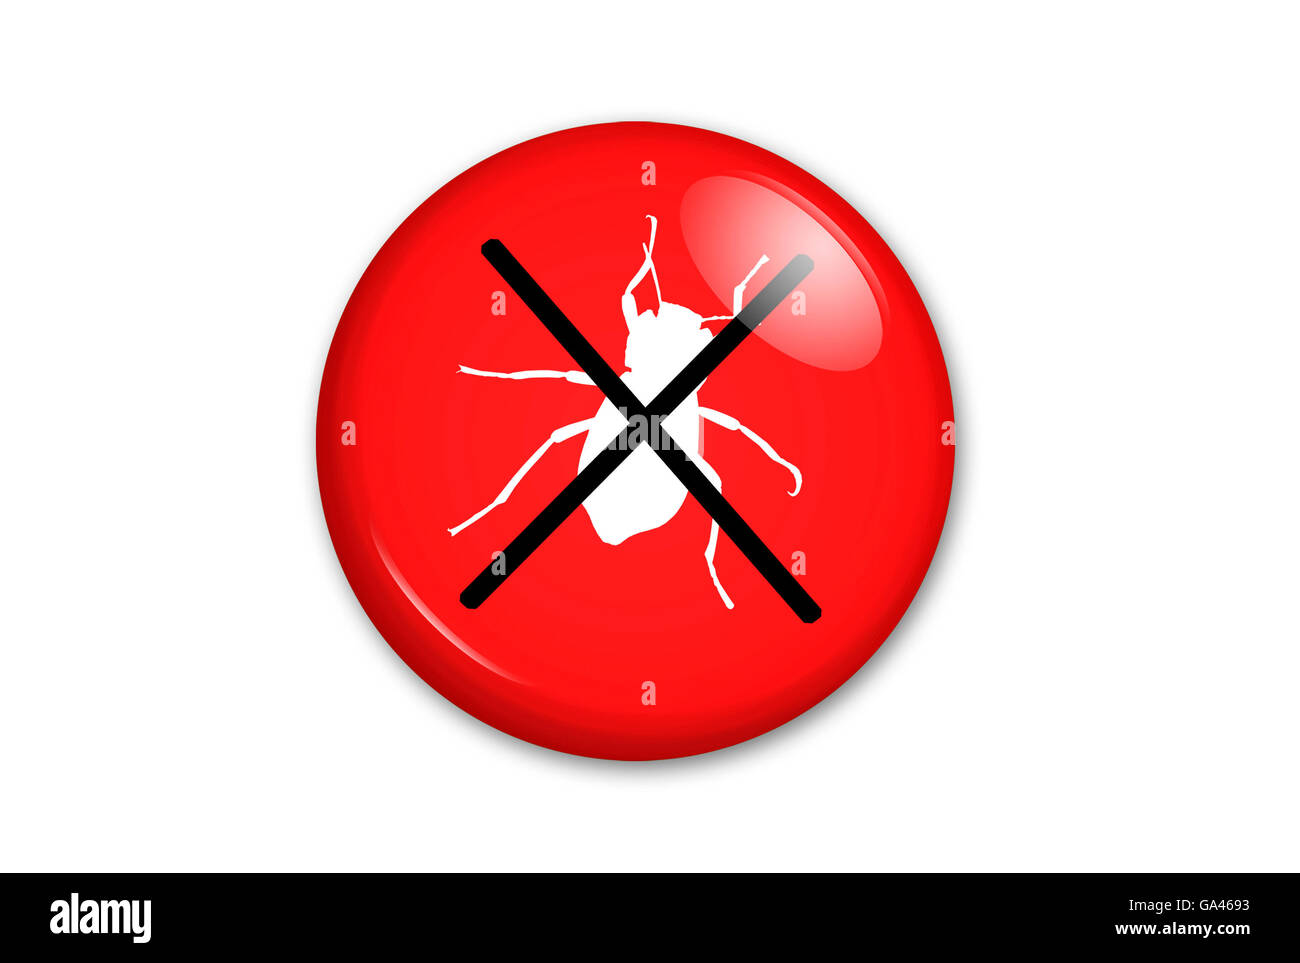 button with symbol of stopping software bugs Stock Photo